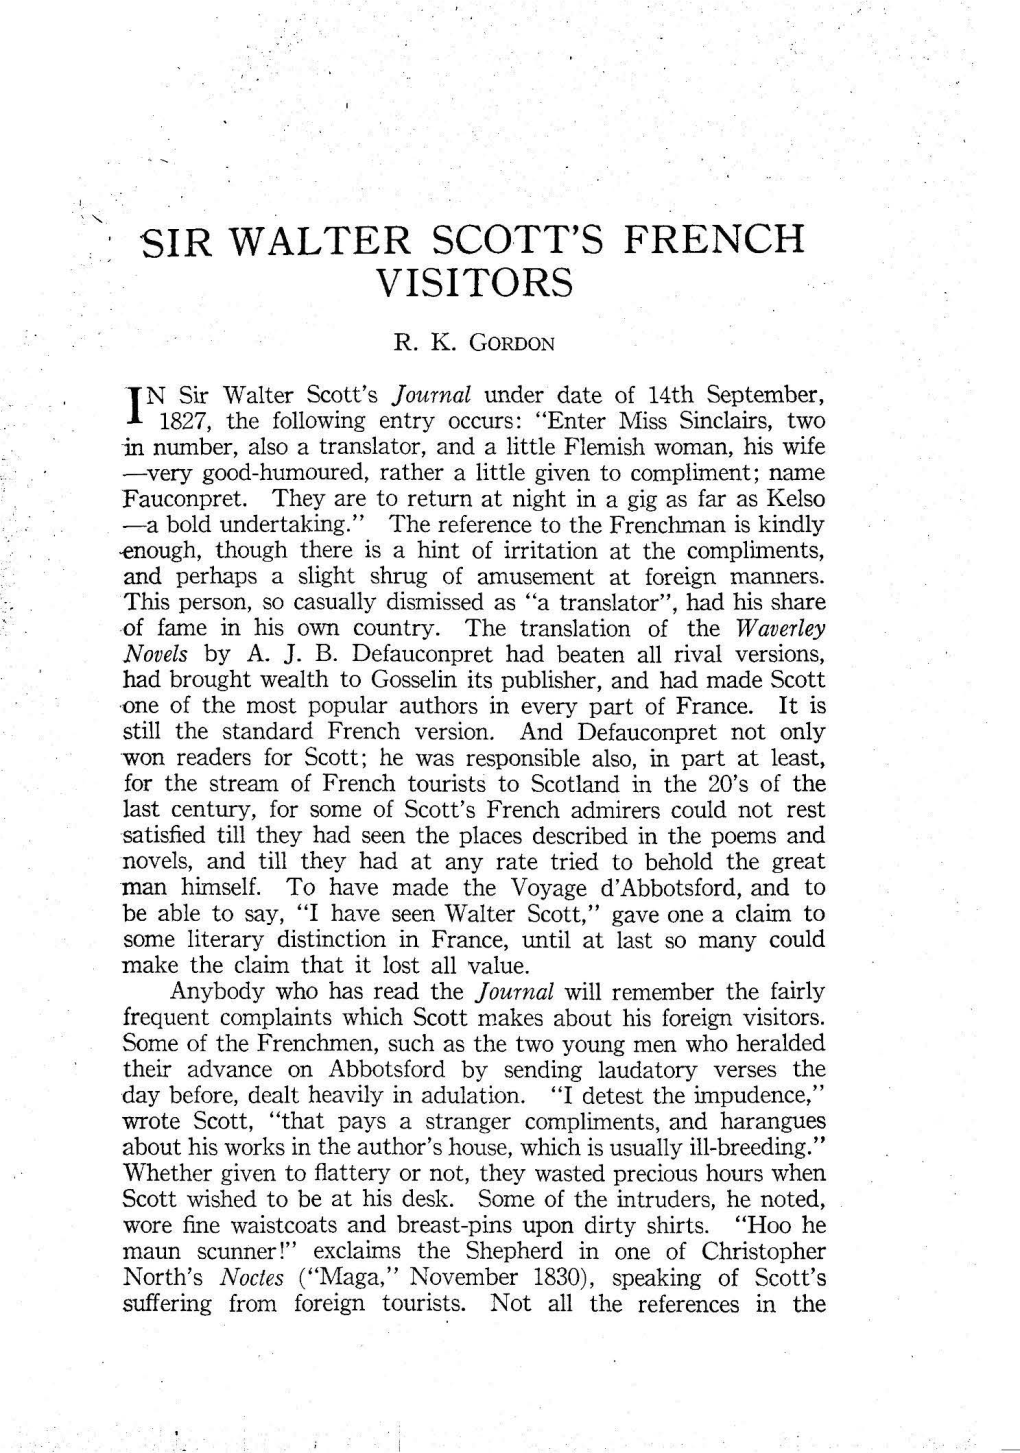 Sir Walter Scott's French Visitors